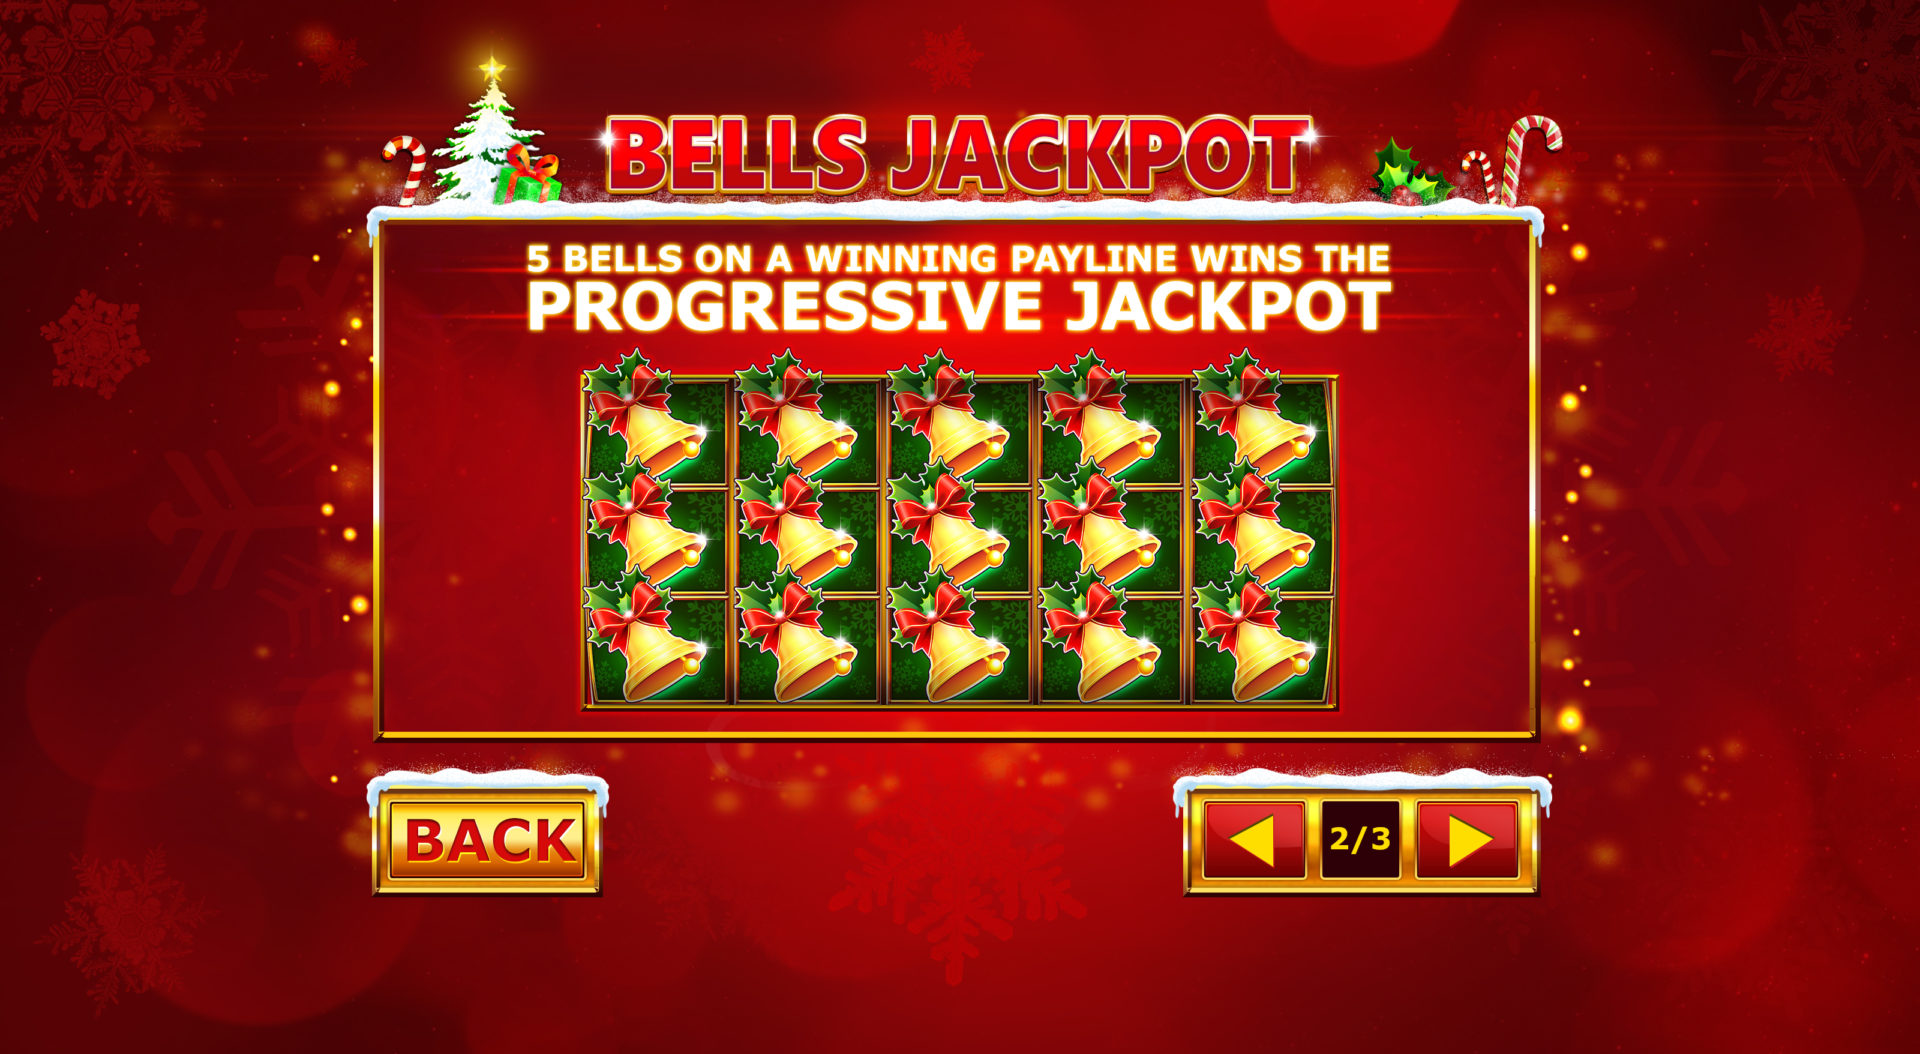 In Jackpot Bells™, wilds expand to fill entire reel sets, dishing out a progressive jackpot to players